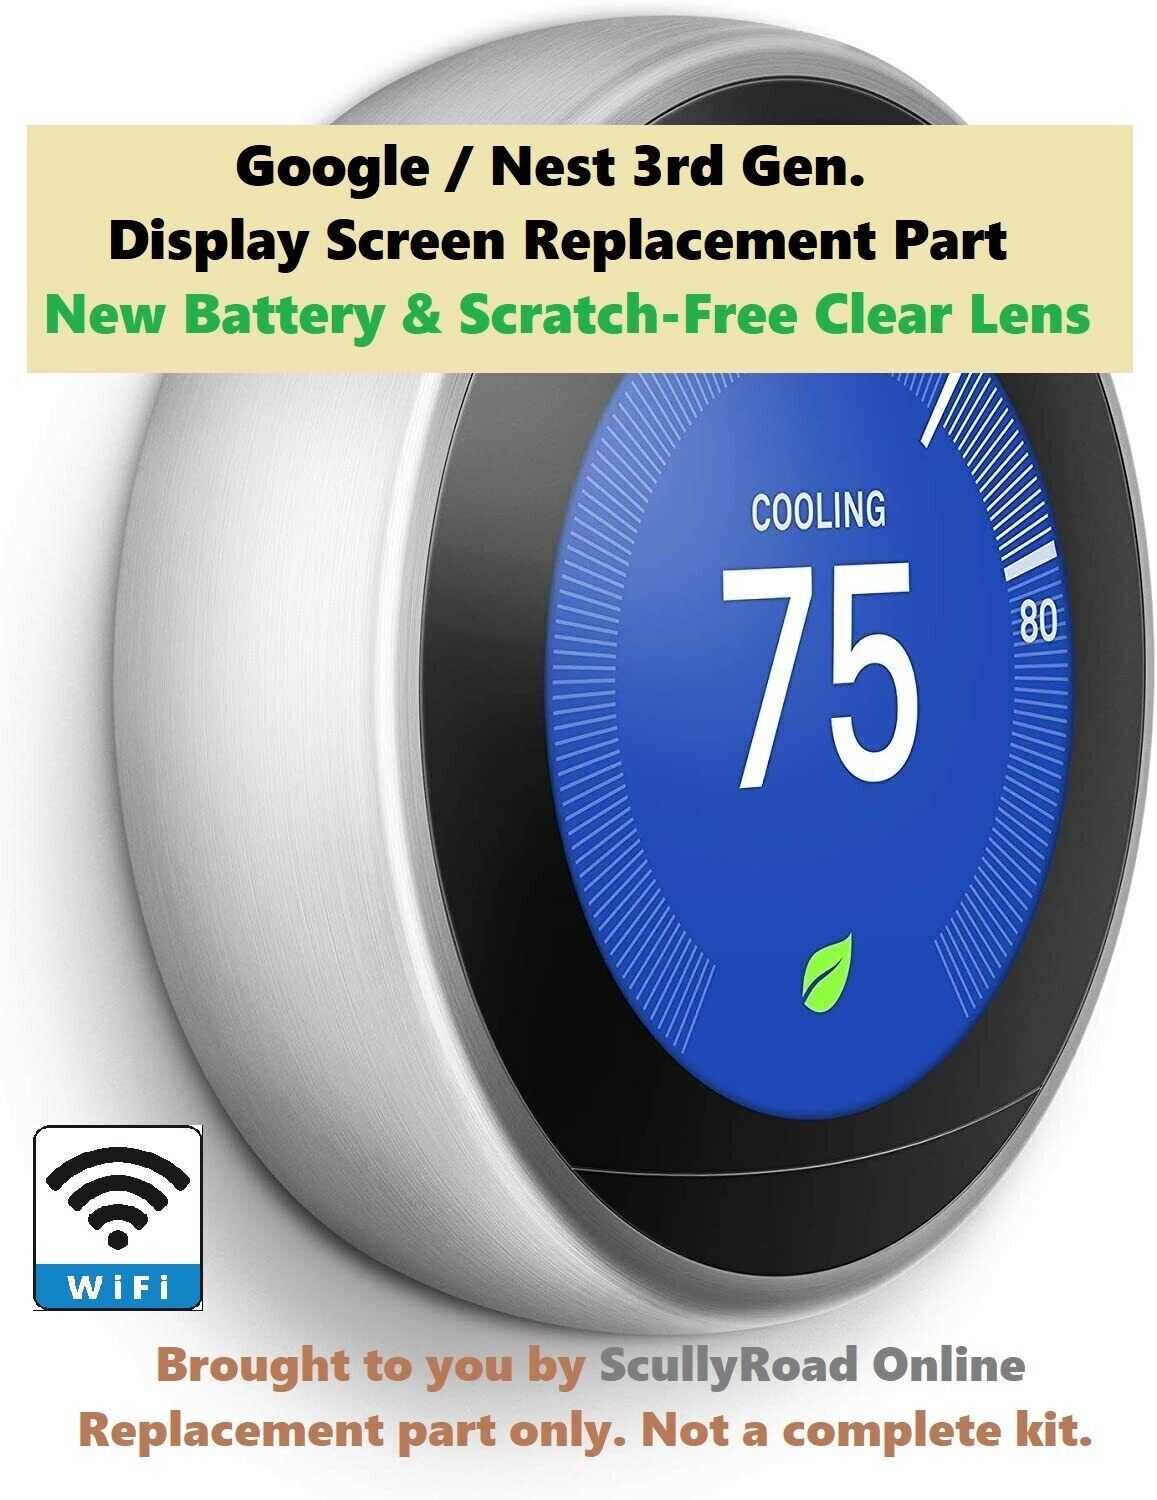 Google Nest 3rd Generation Learning Stainless Steel WIFI Thermostat: REPLACEMENT